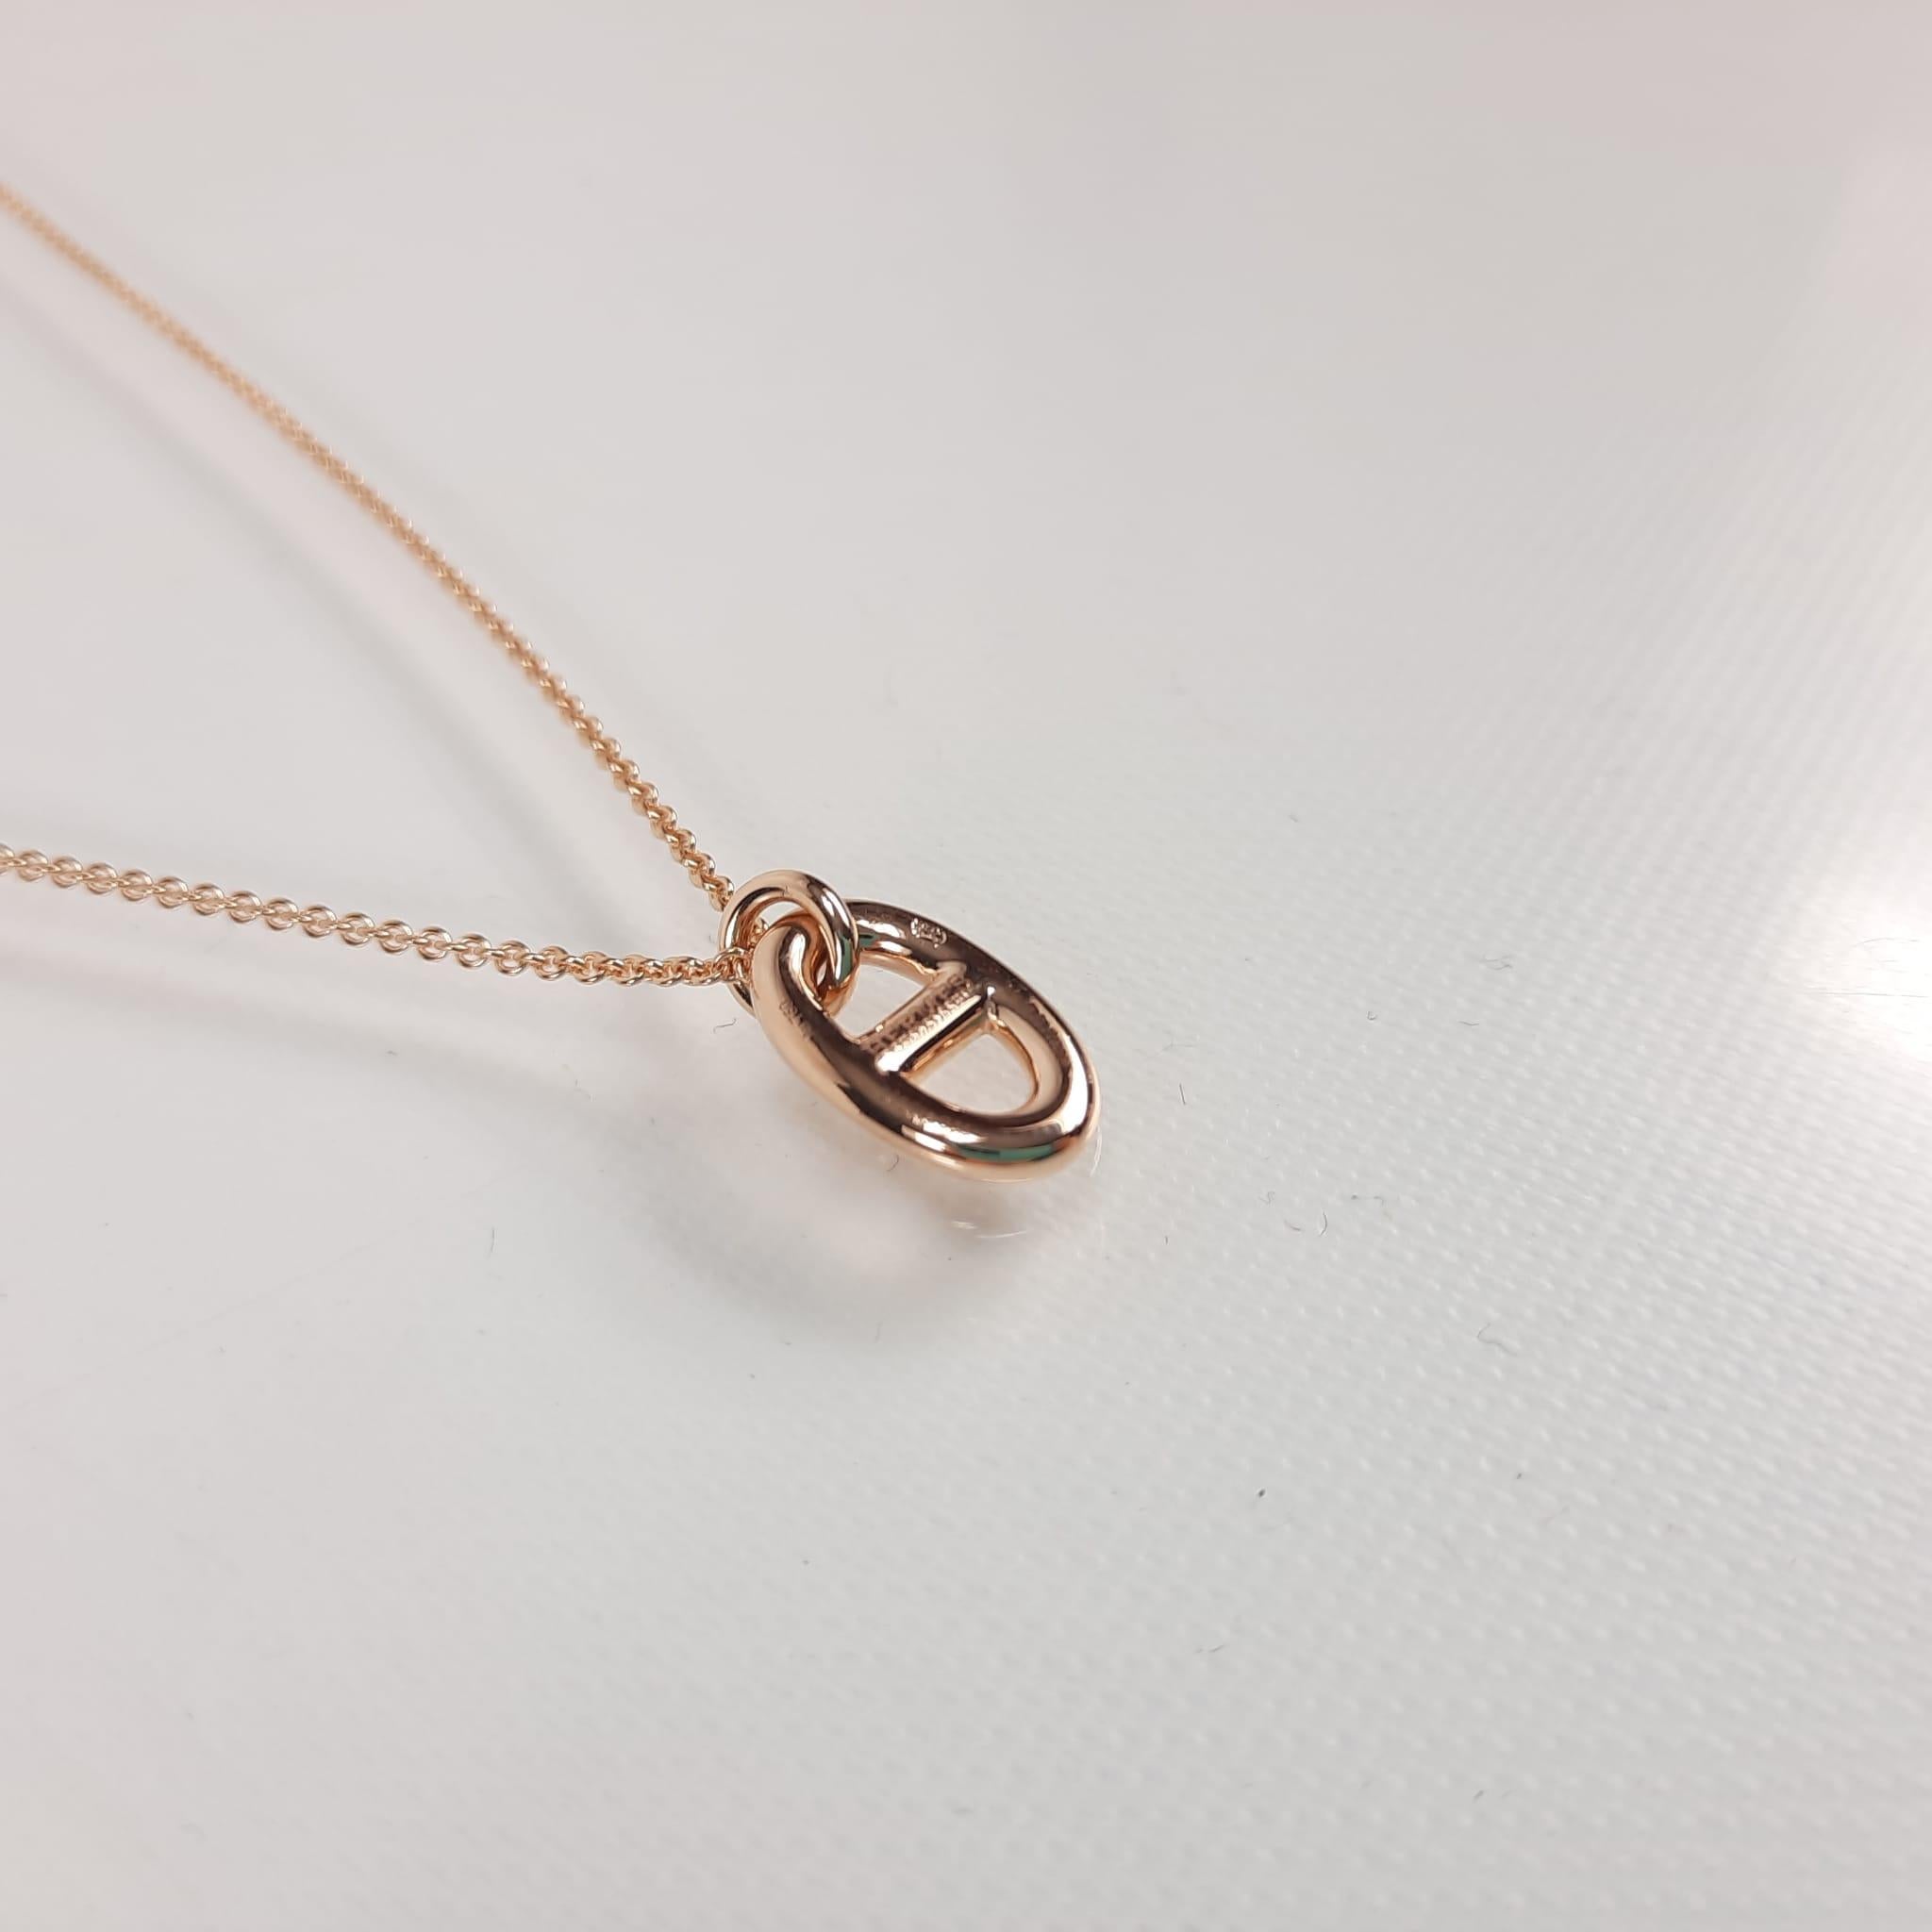 Rose gold pendant on adjustable chain
750/1000 pink gold
Adjustable Circumference: 39-41cm  
Pattern size: 1.4 x 0.87 cm